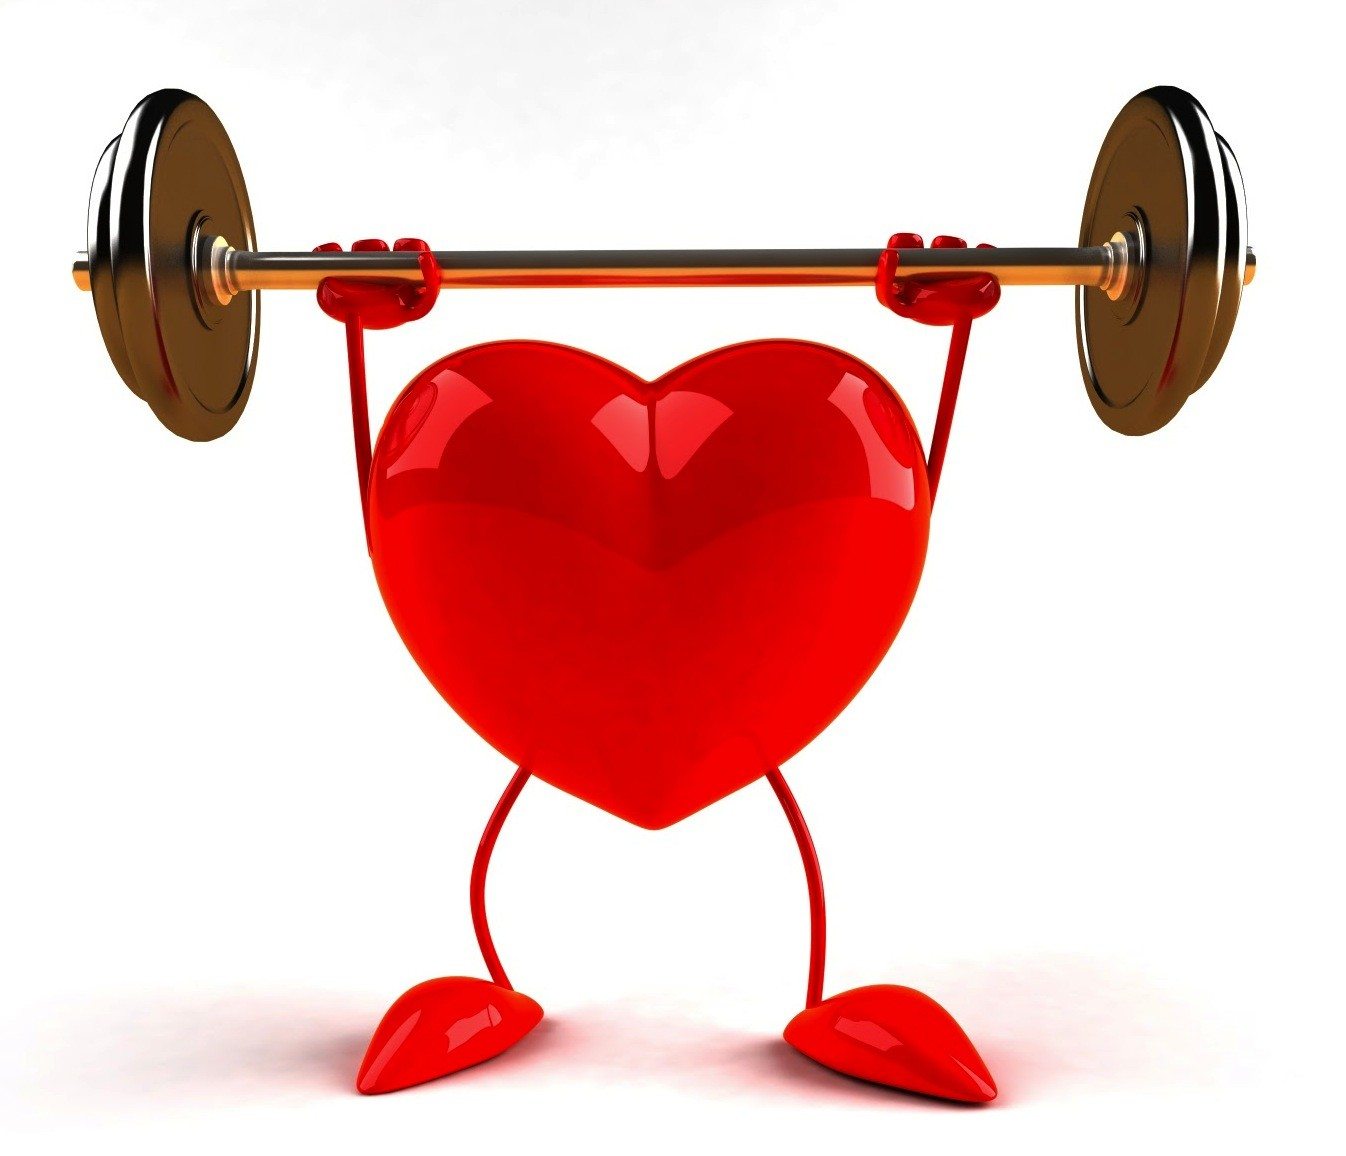 Working Out for Better Heart Health